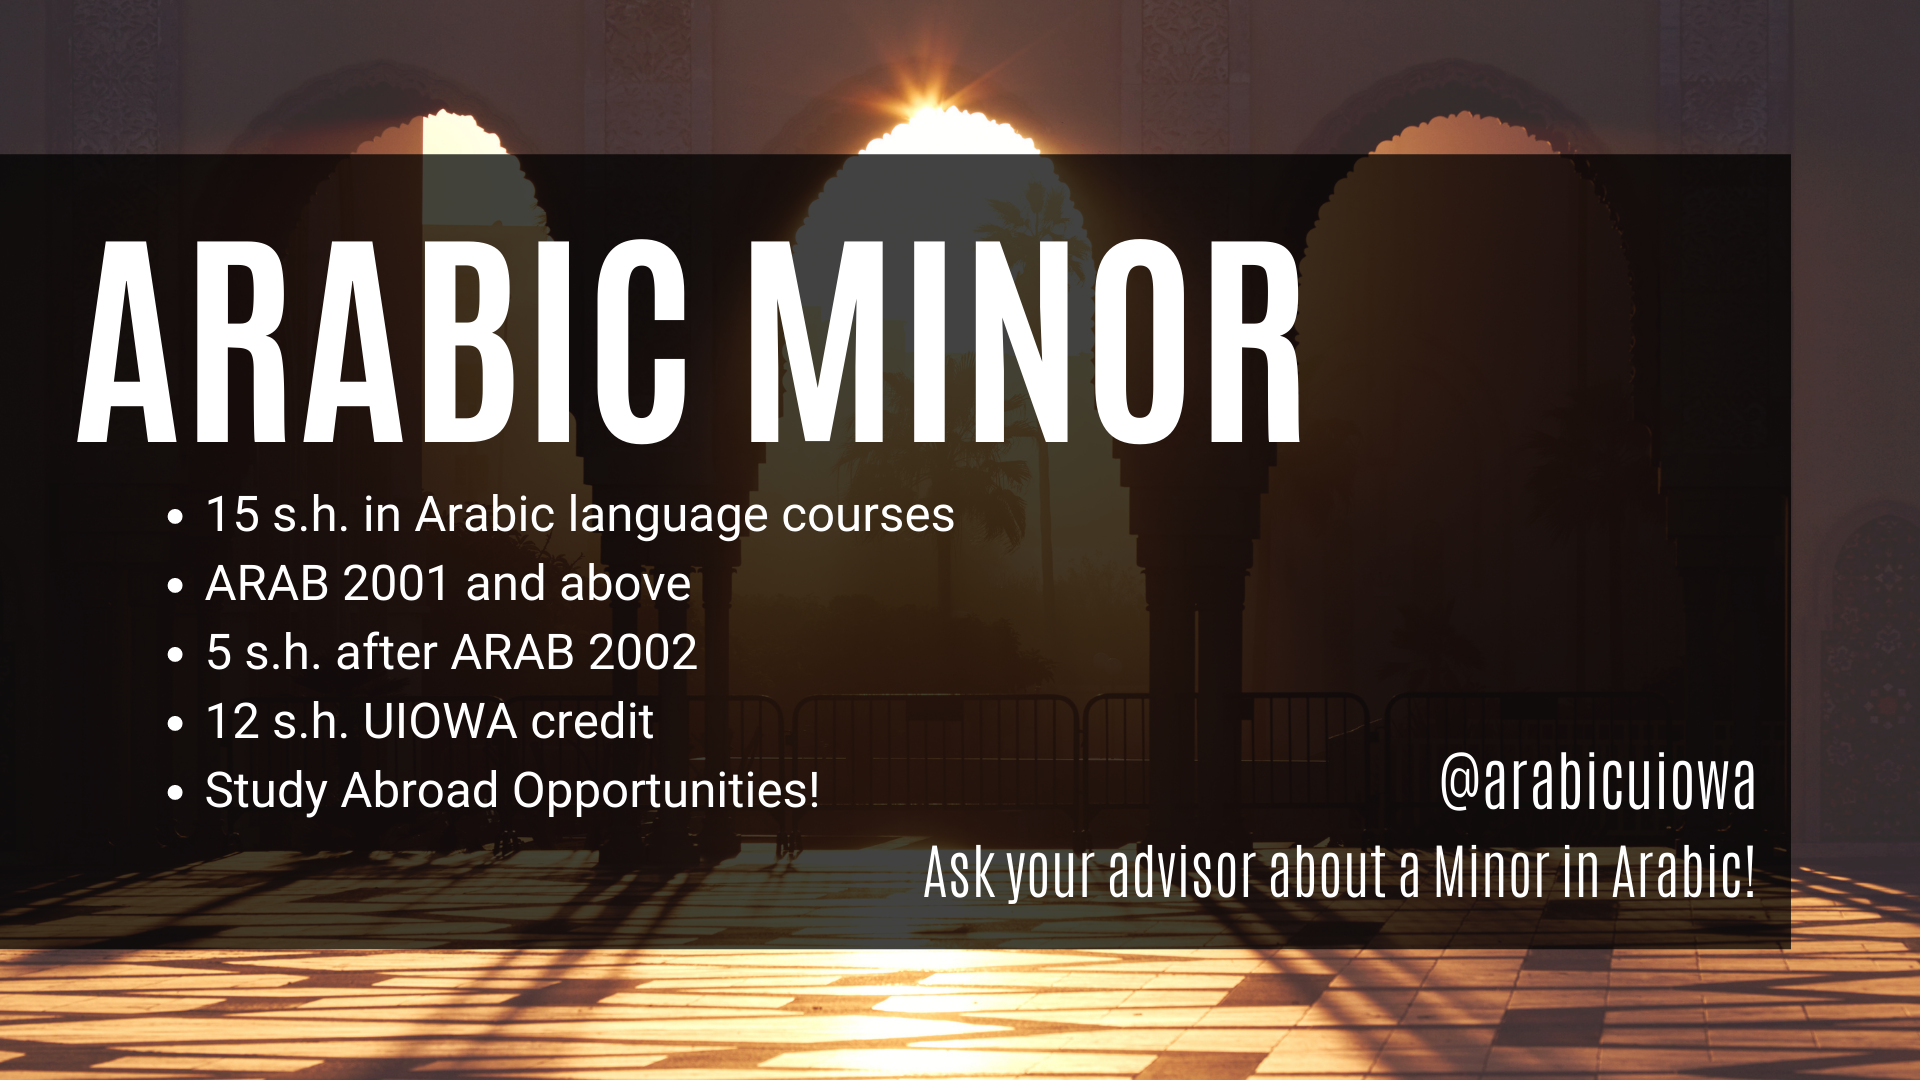 Arabic Minor 15 s.h. in Arabic language courses  ARAB 2001 and above 5 s.h. after ARAB 2002 12 s.h. UIOWA credit Study Abroad Opportunities! @arabicuiowa Ask your advisor about a minor in Arabic